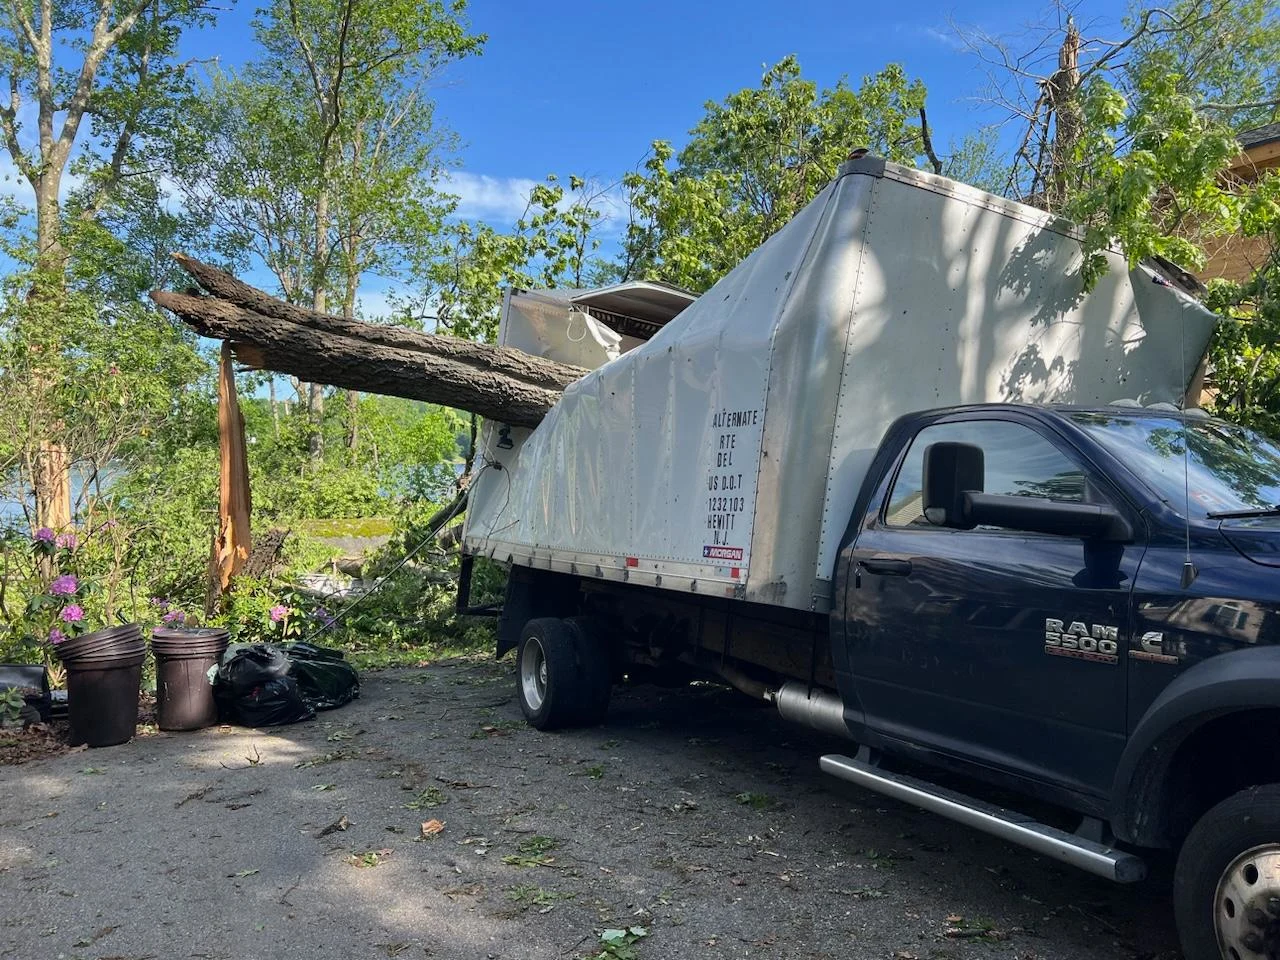 ‘It was like a nightmare. Very scary.’ Thursday’s severe storm creates chaos for West Milford residents